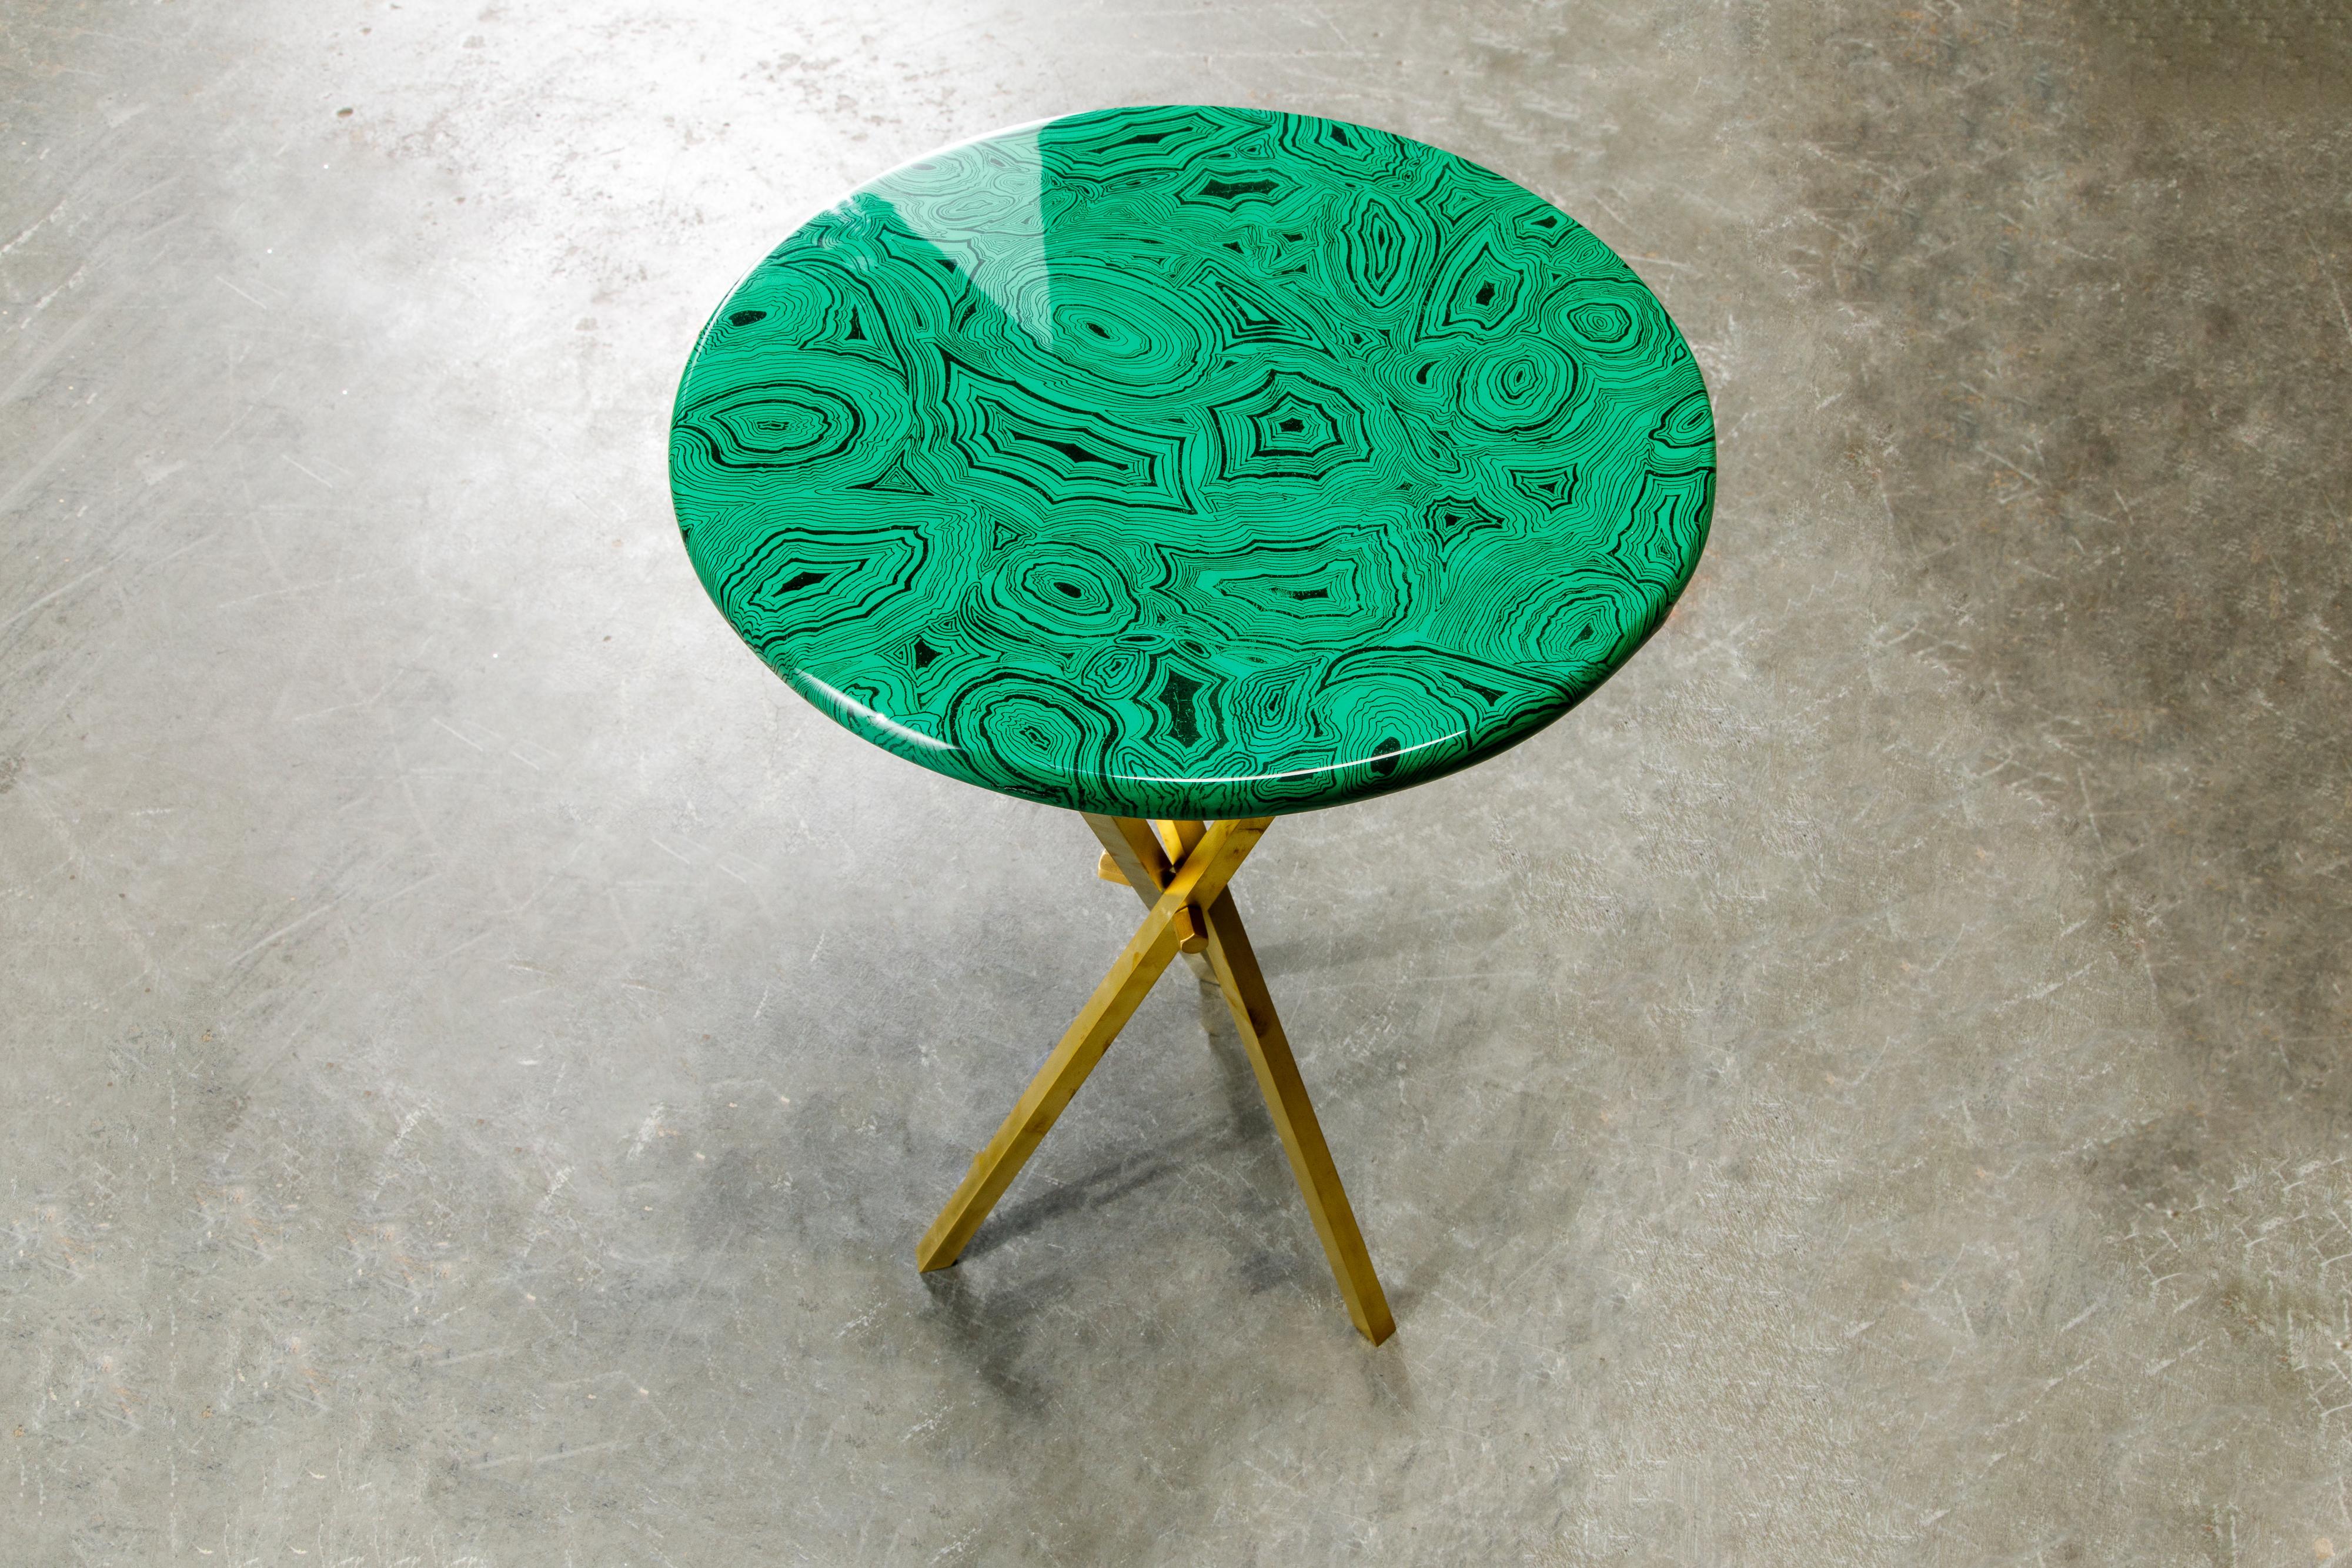 20th Century 'Malachite' and Brass Side Table by Piero Fornasetti, circa 1970s, Signed 